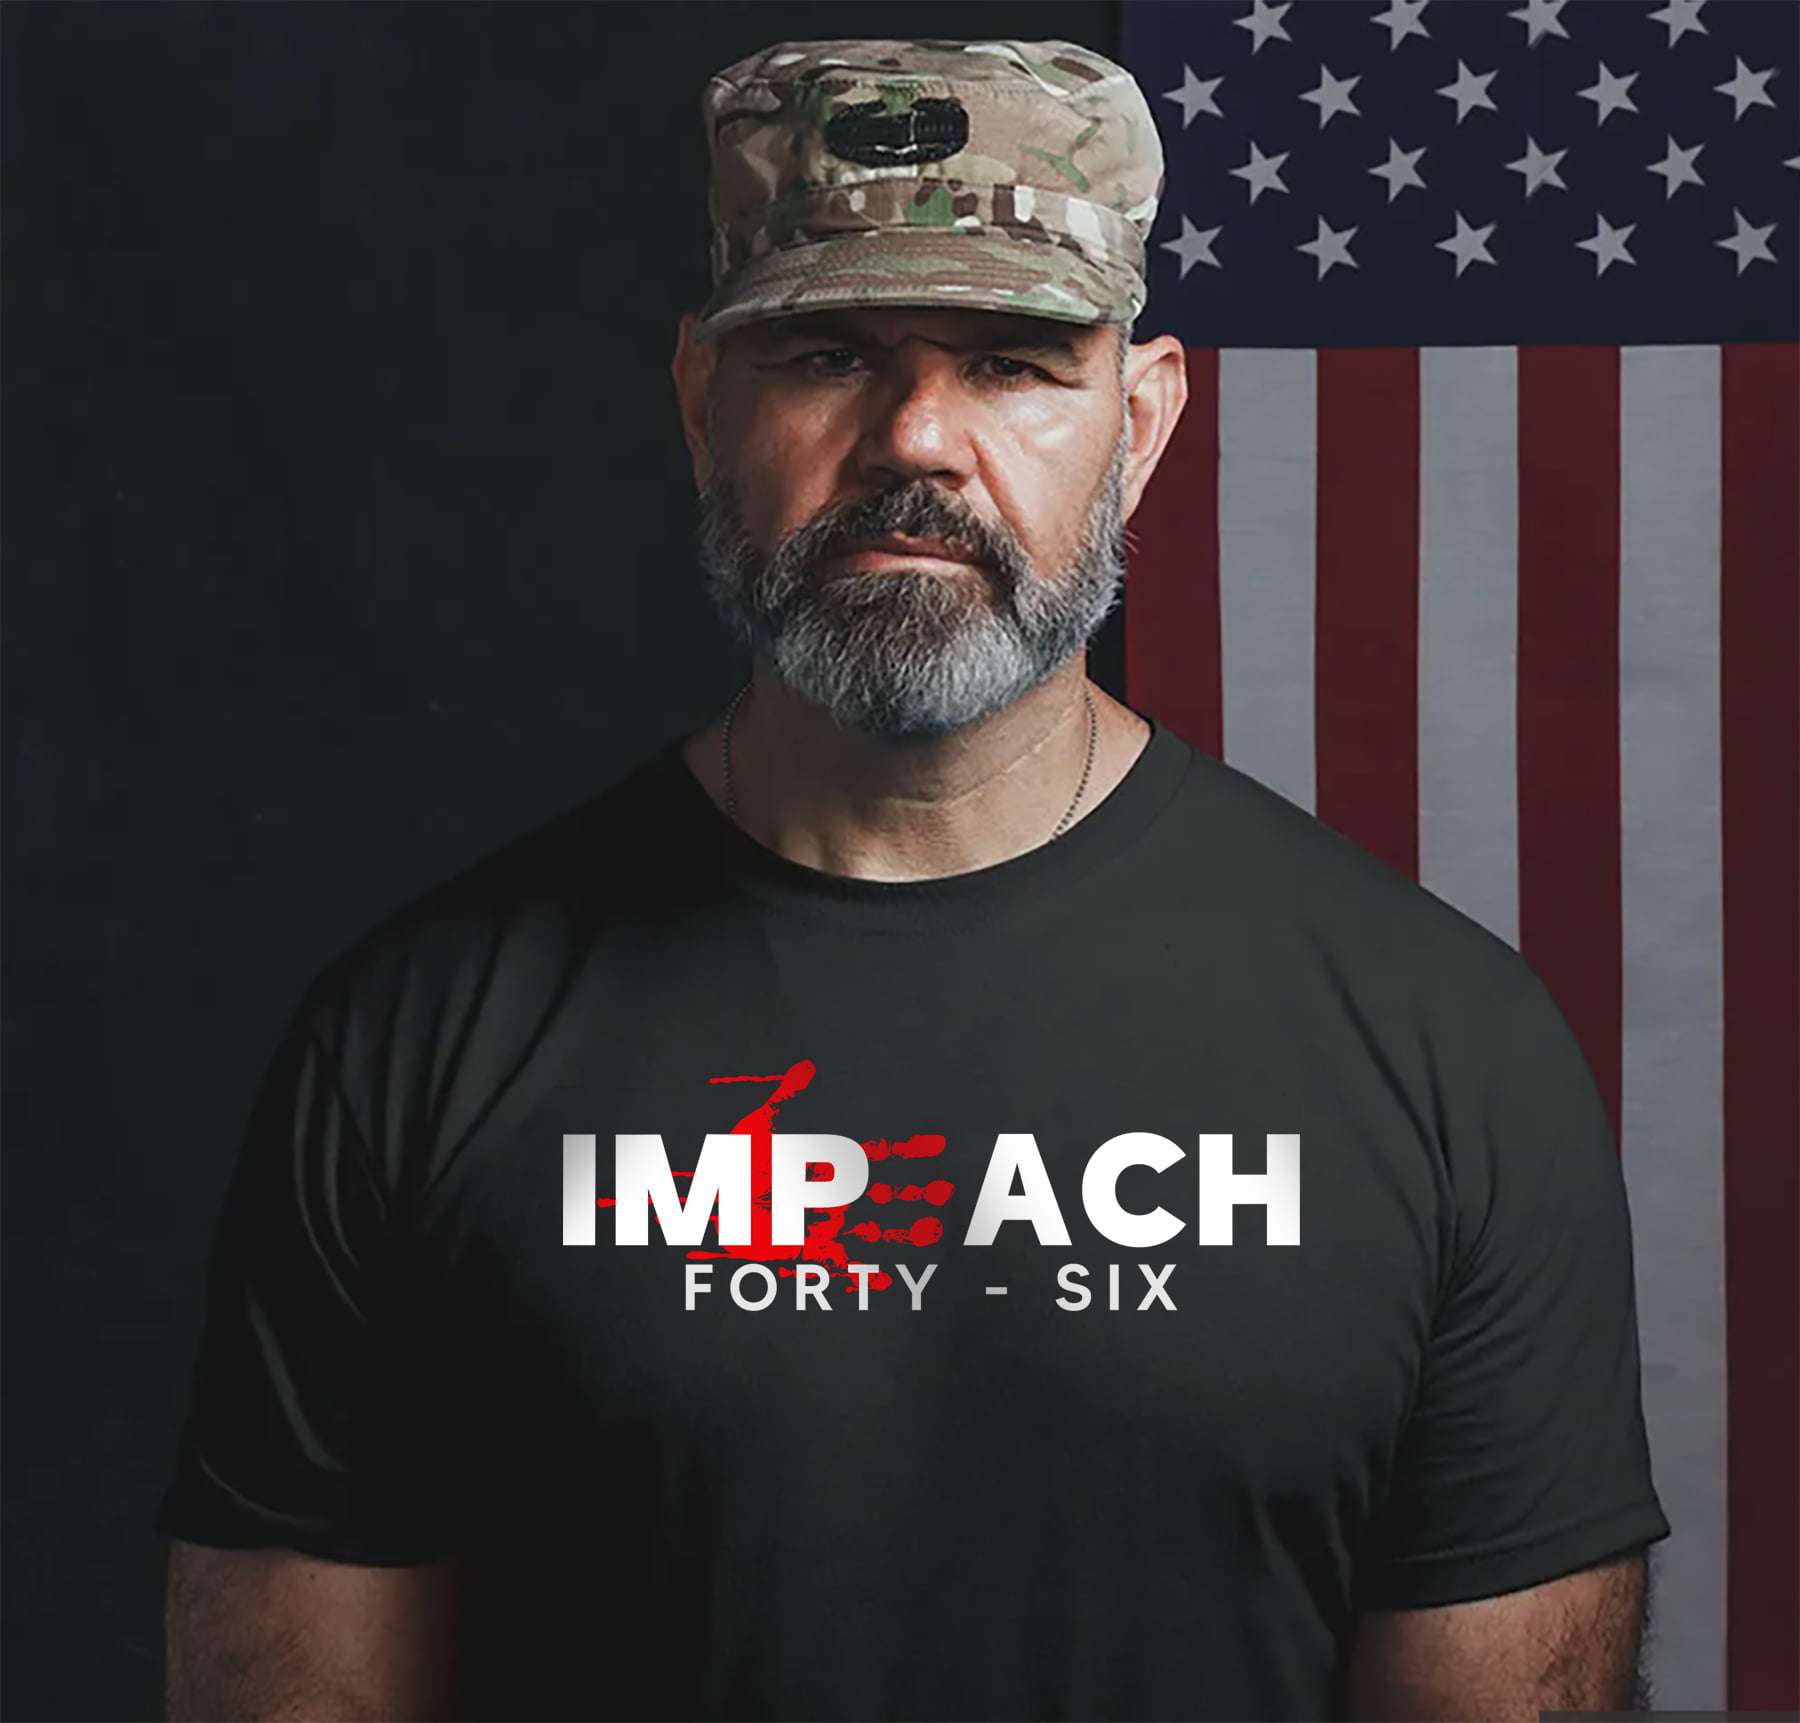 Impeach Forty Six